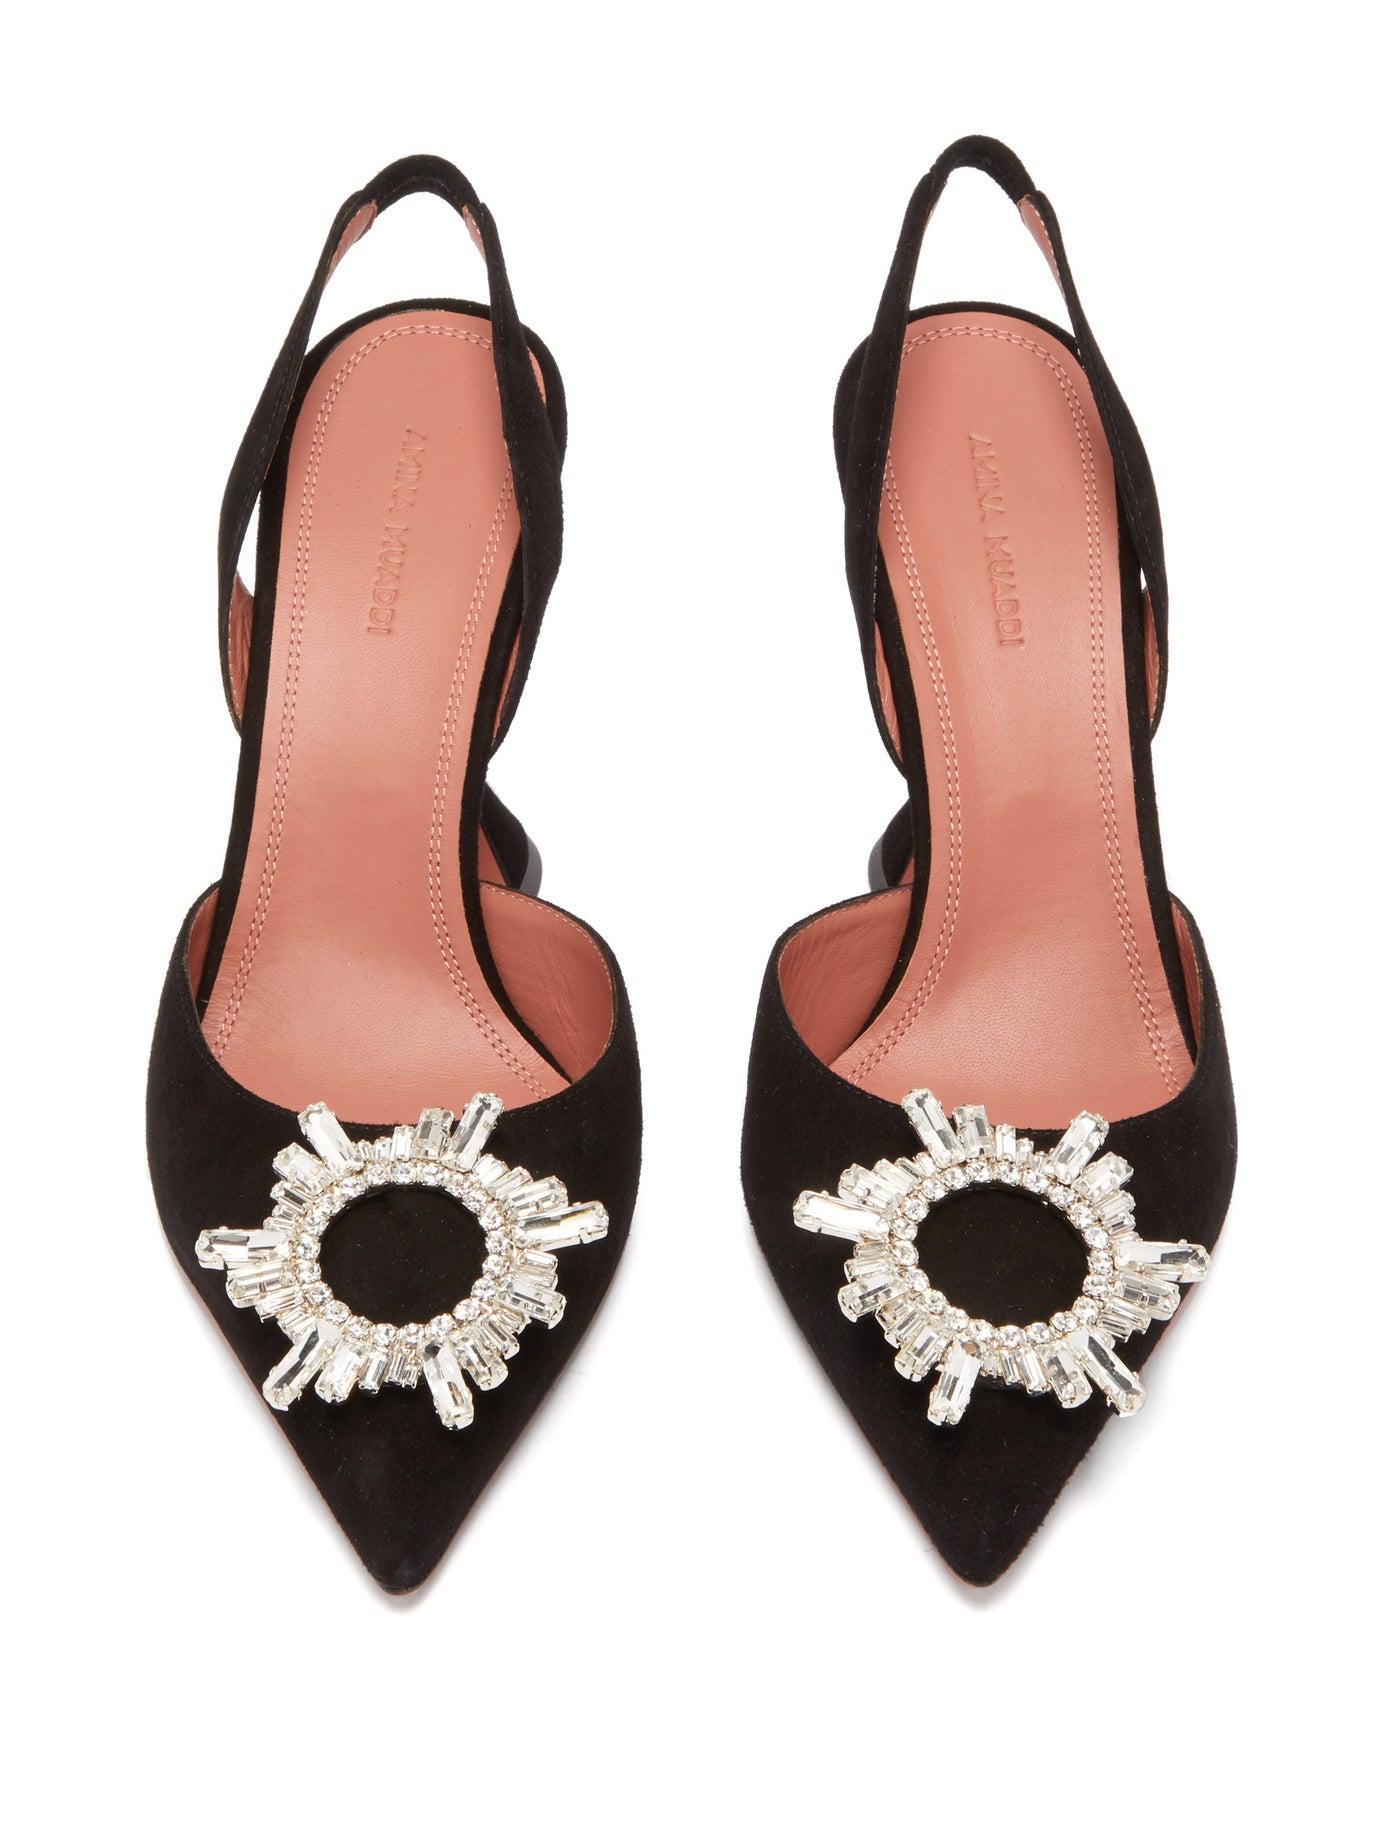 AMINA MUADDI Satin Begum Sling Black Pumps With Crystal Buckle On The ...